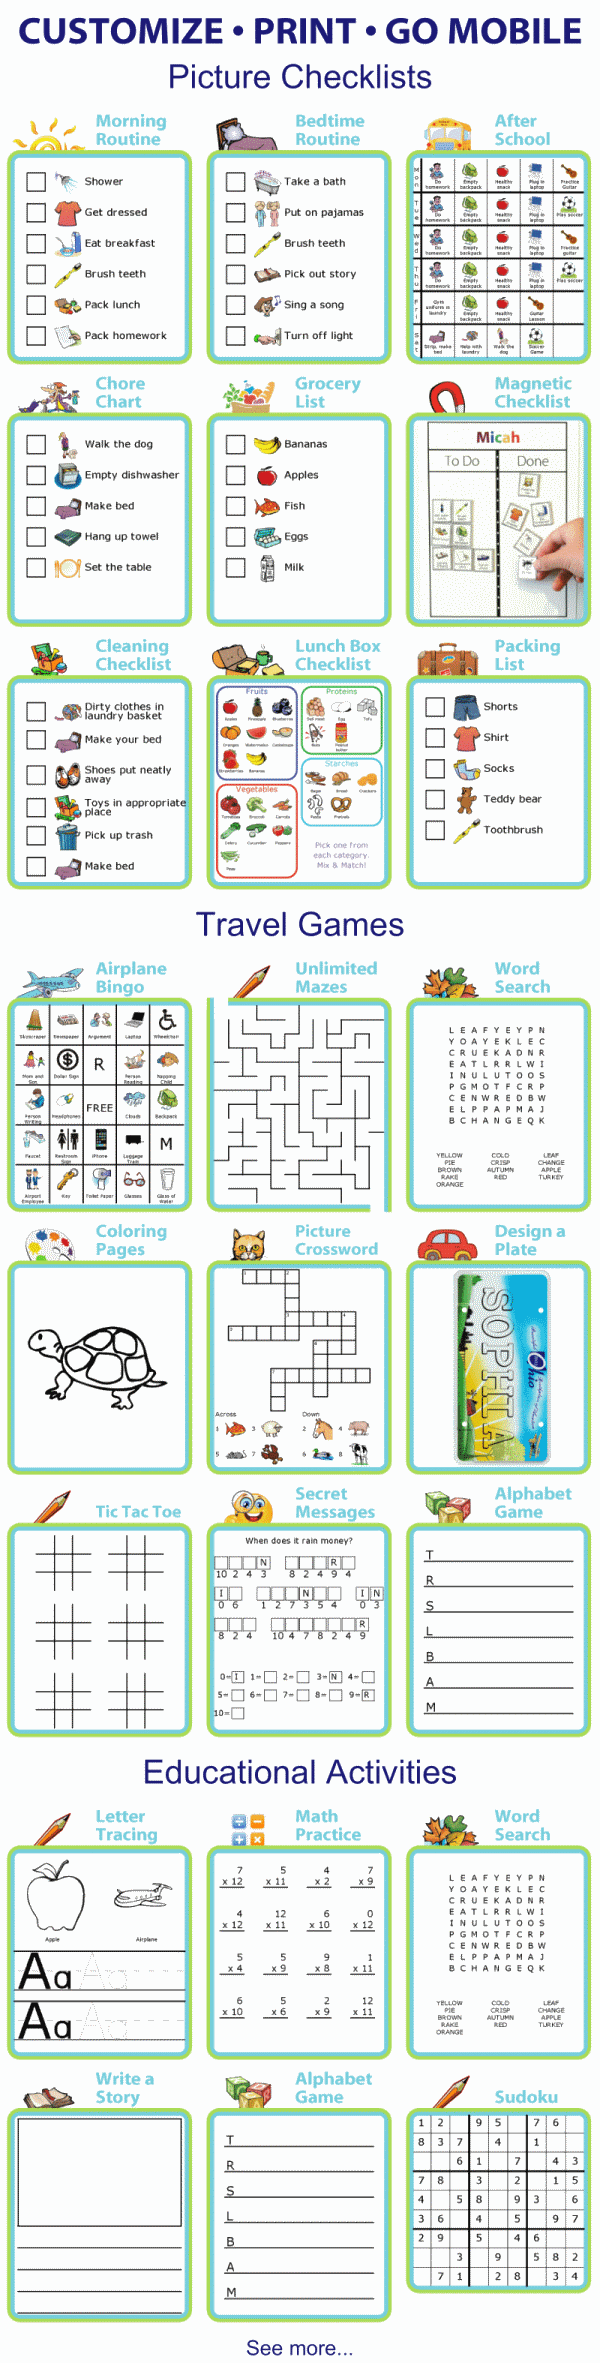 There are more than 30 activities to choose from! You'll find 13 picture checklists you can edit, print, and use on a mobile device, printable travel activities for great tech free travel, and printable educational activities that you can easily customize to your child's age and abilities.